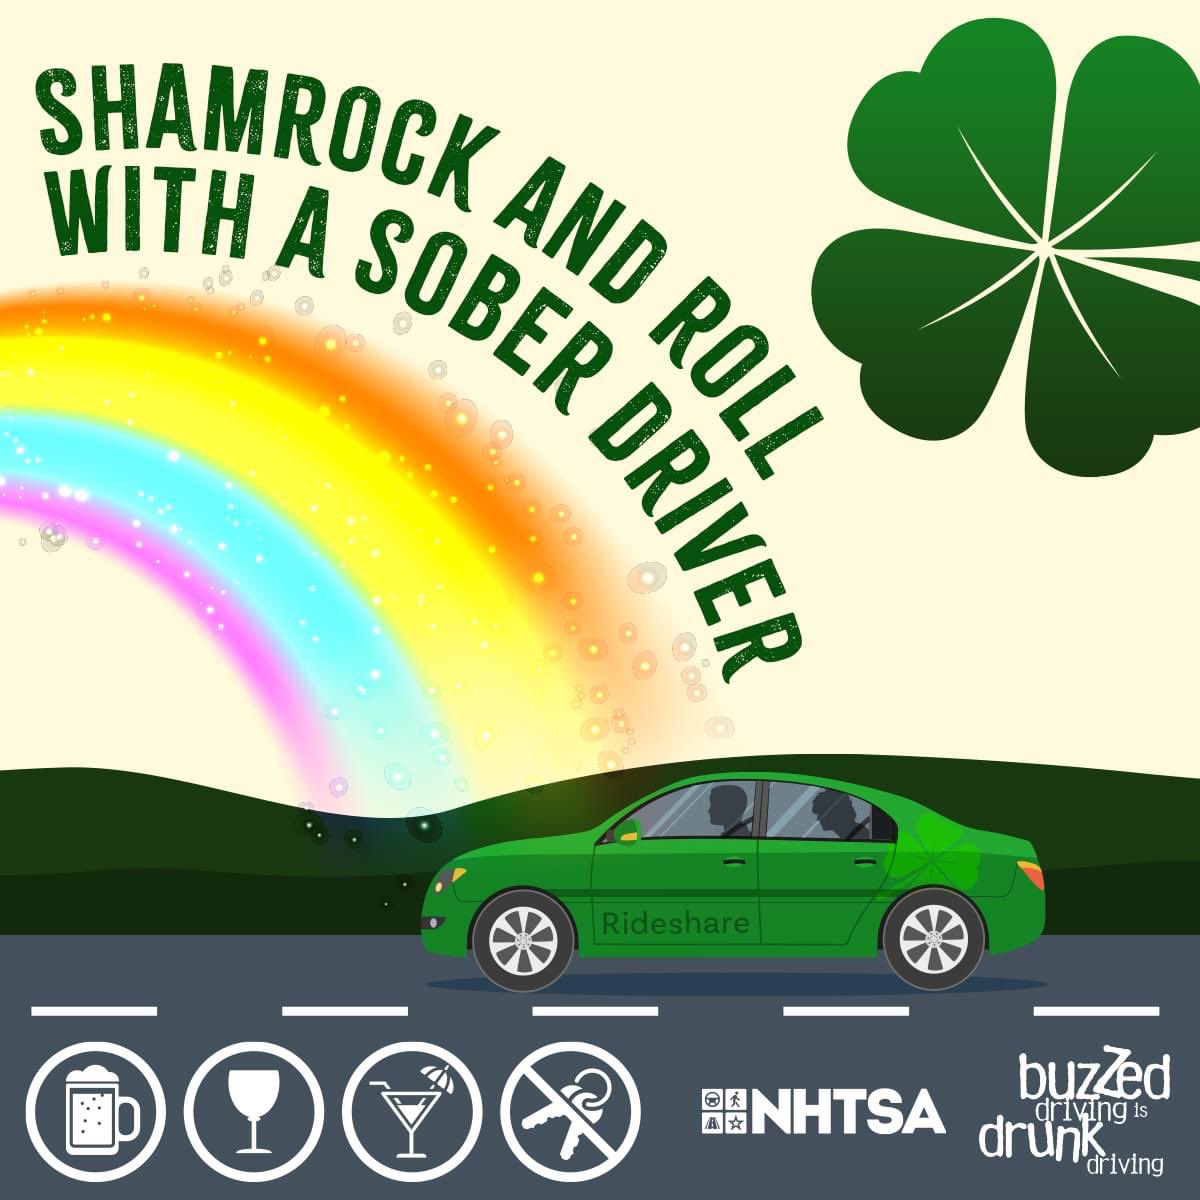 Drunk drivers find steel bars, not a pot o’ gold, at the end of a rainbow. 💰 🌈 #BuzzedDriving is drunk driving. Celebrate St. Patrick’s Day safely in Surry County!